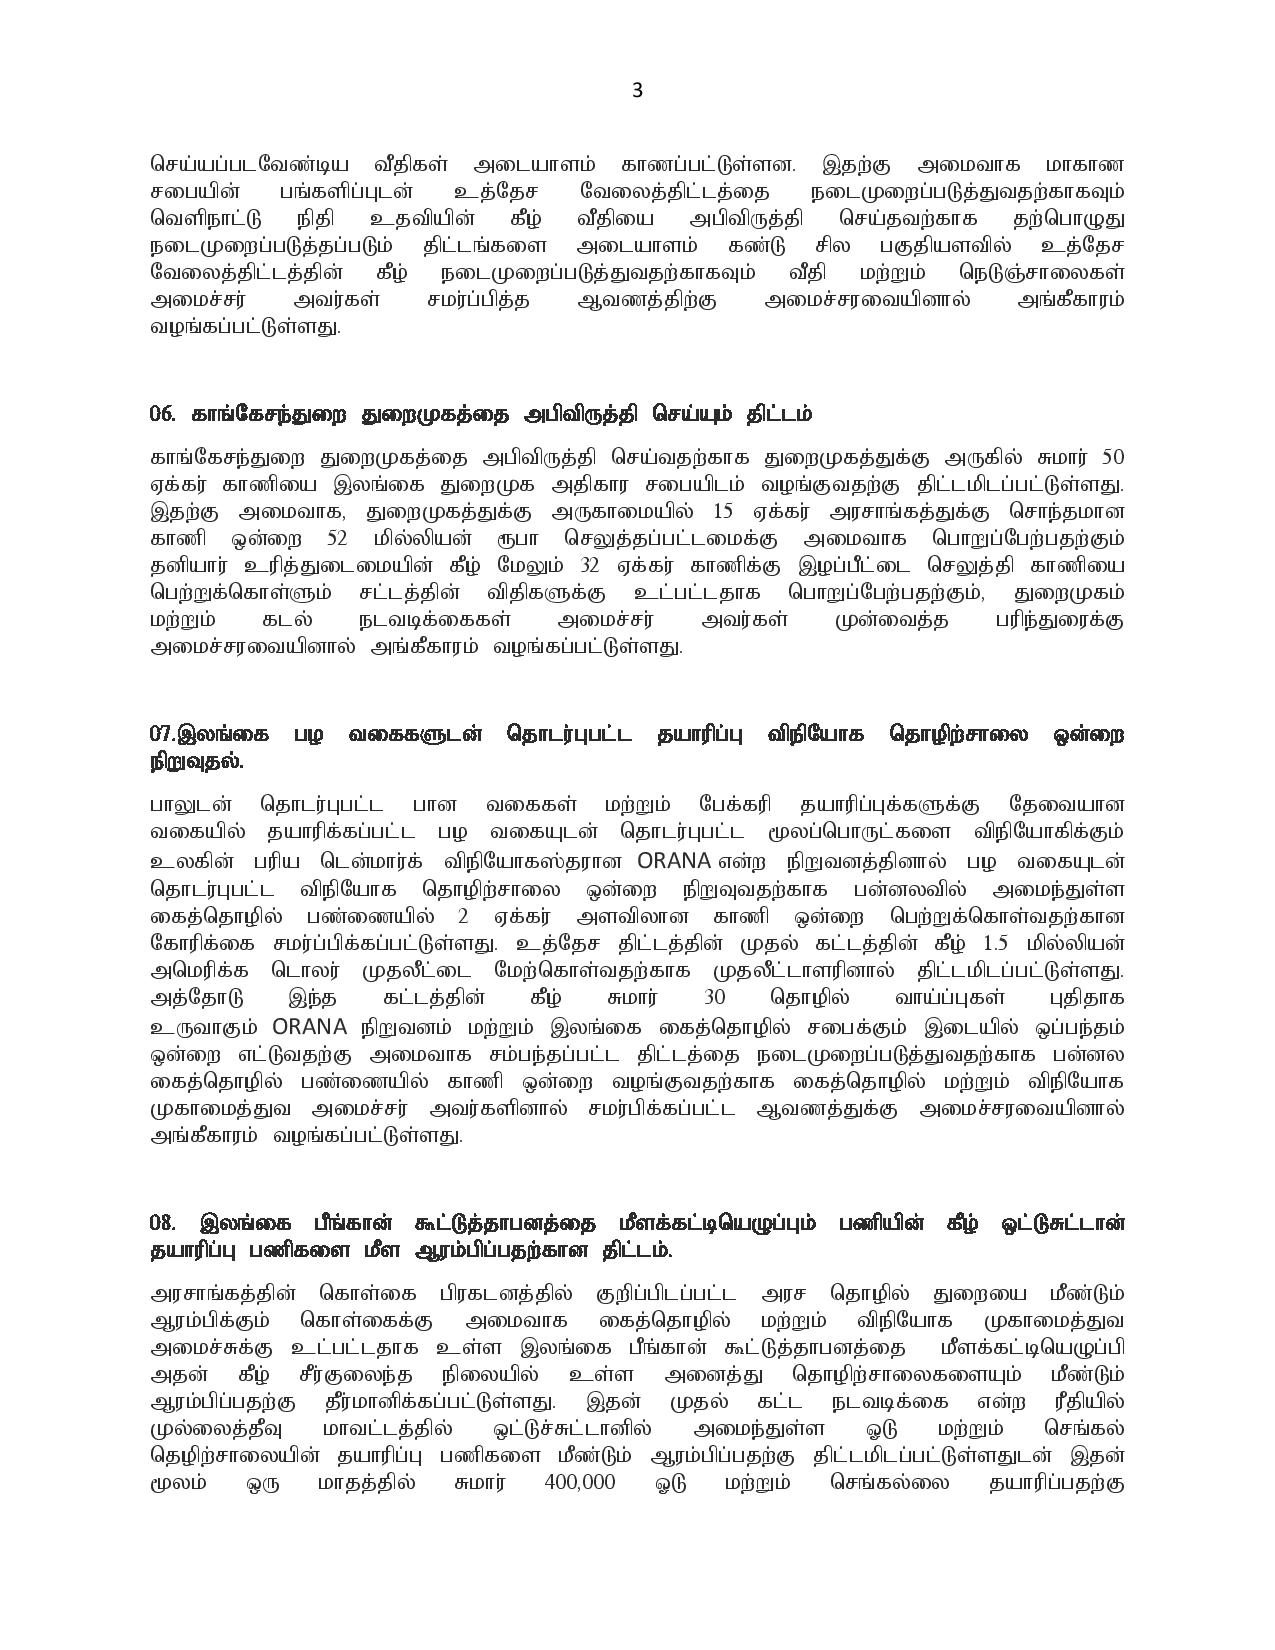 05.02.2020 Cabinet Tamil page 003